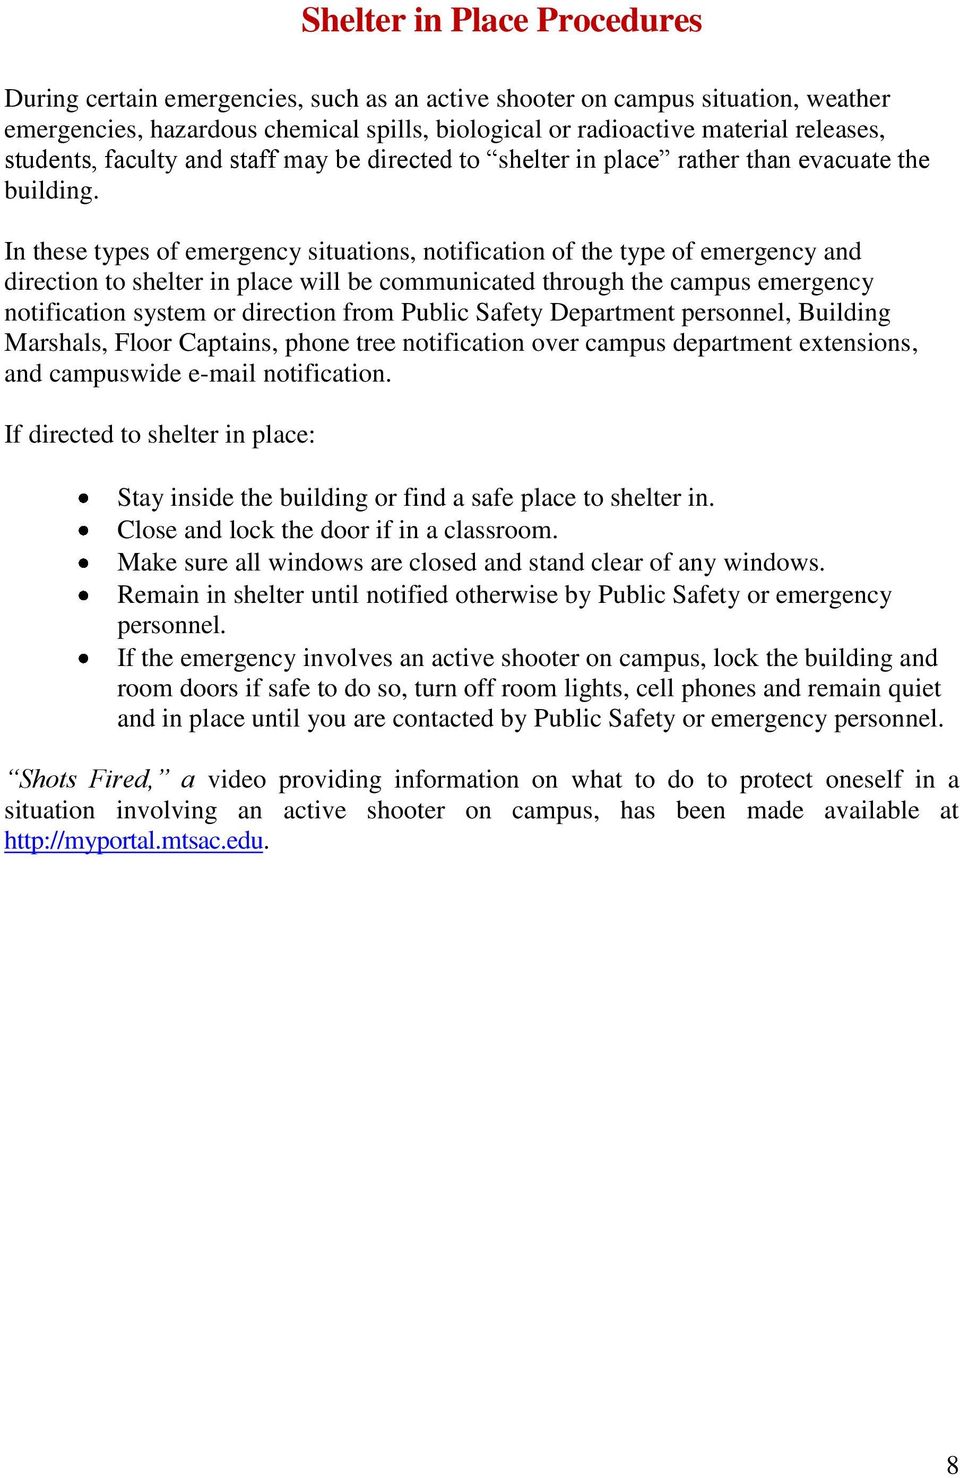 In these types of emergency situations, notification of the type of emergency and direction to shelter in place will be communicated through the campus emergency notification system or direction from